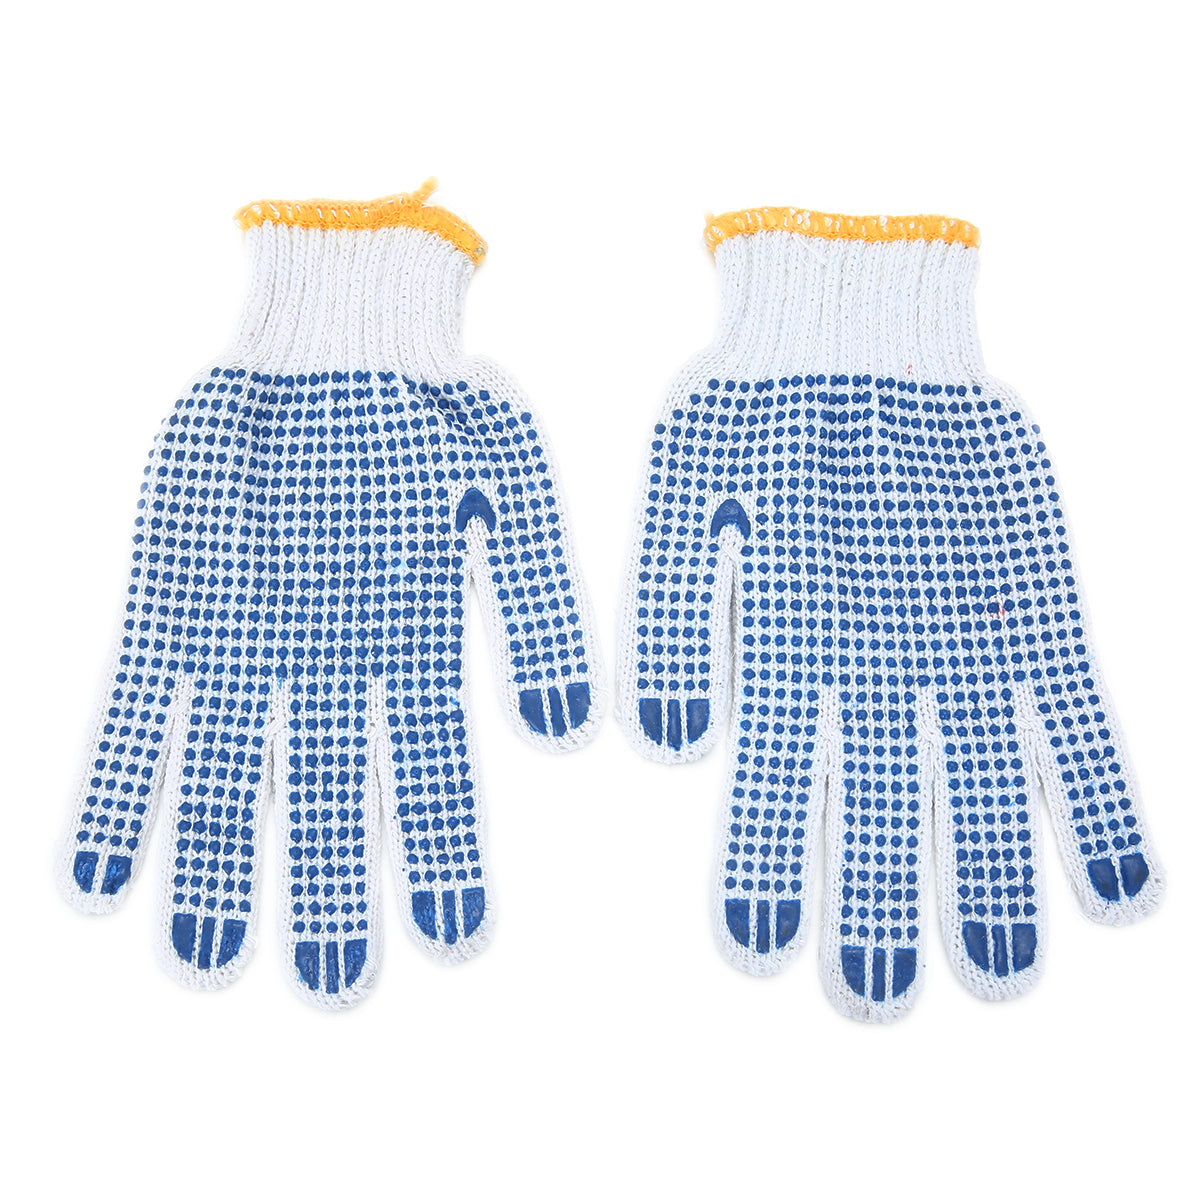 3-Pairs Cotton With Rubber Grip Glove